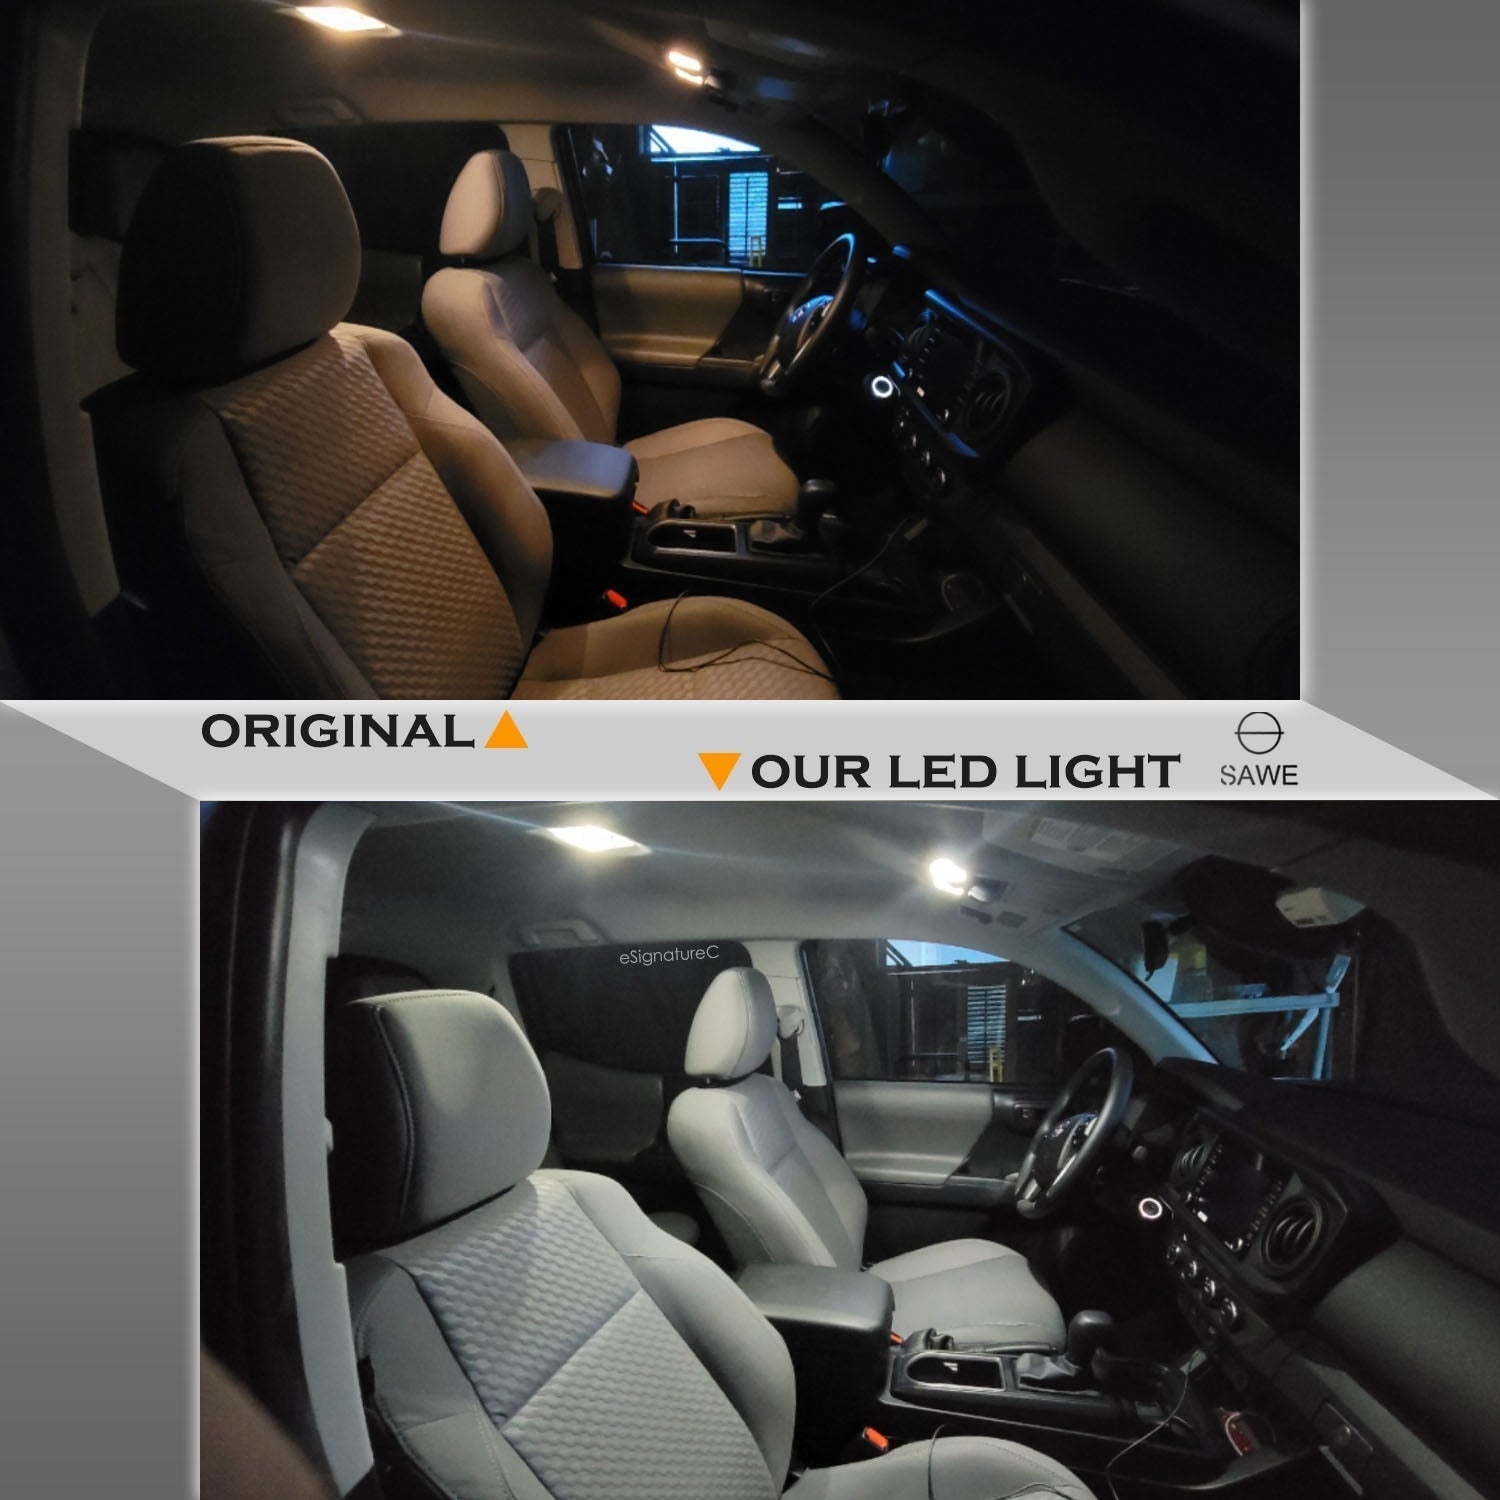 For Toyota Sequoia Interior LED Lights - Dome & Map Lights Package Kit for 2008 - 2022 - White